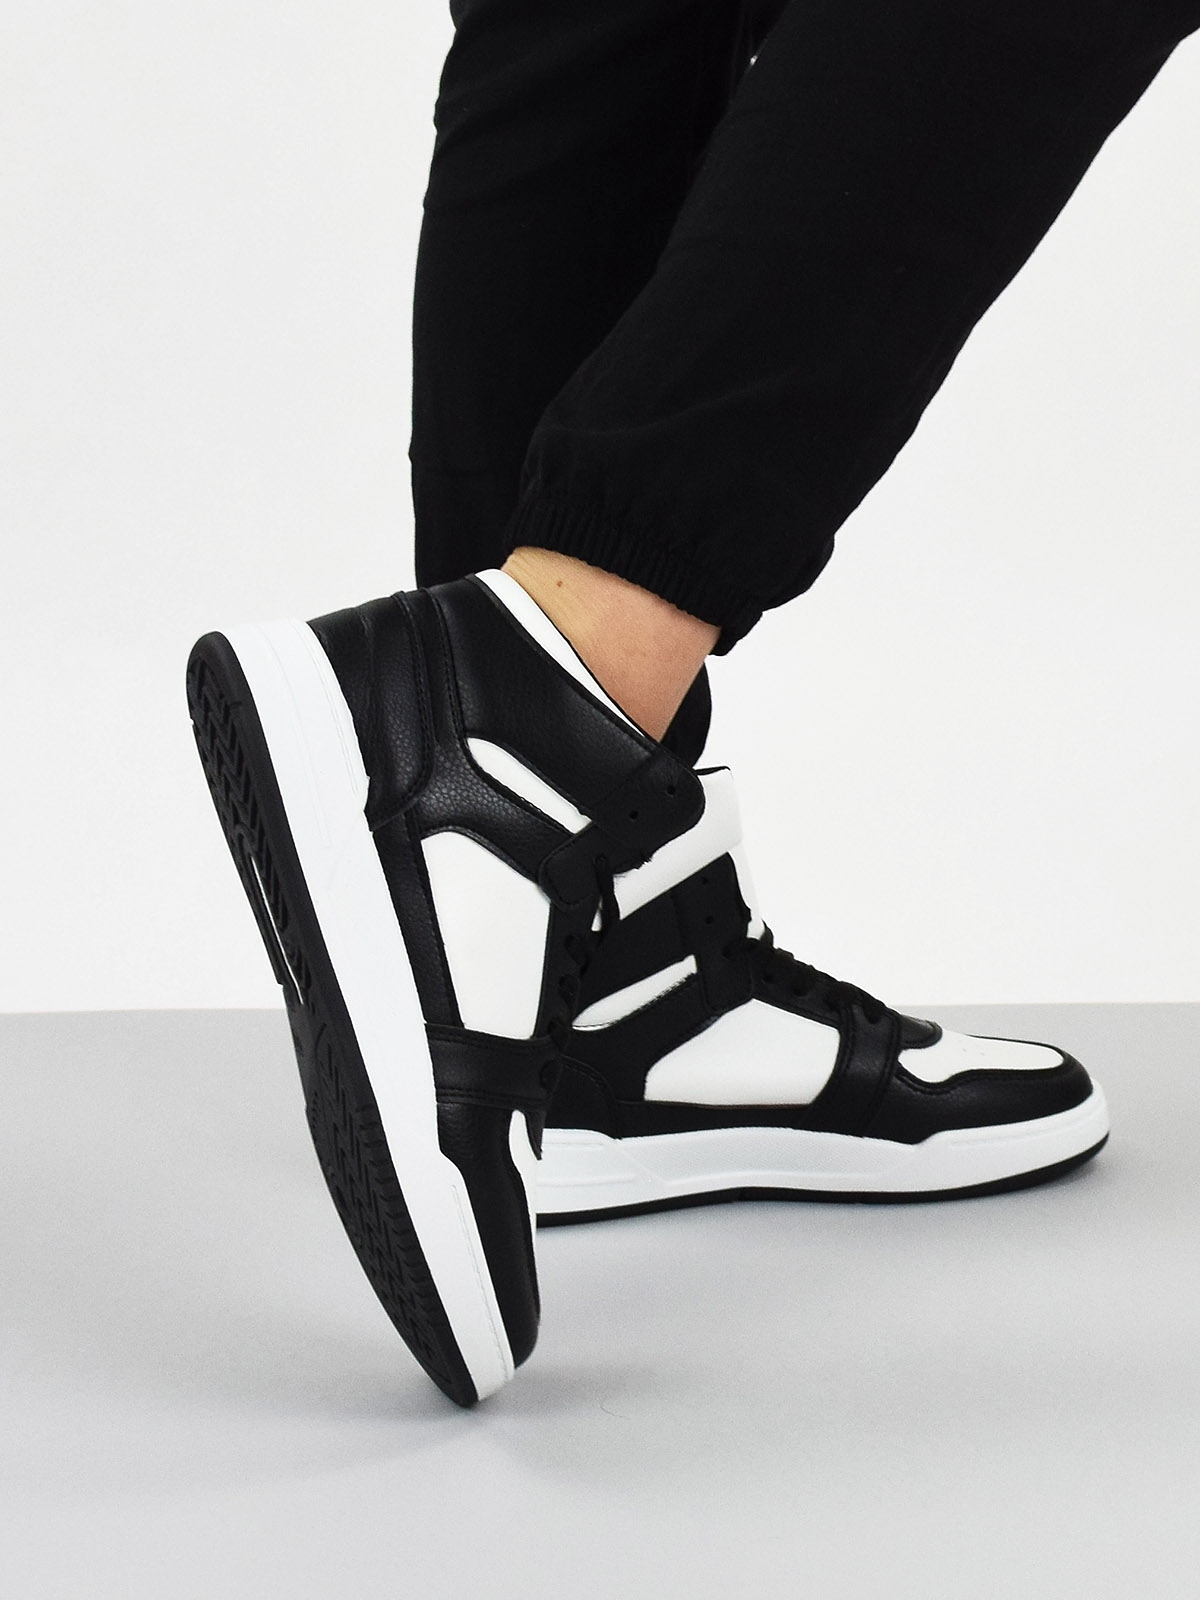 Lace up trainers in black & white